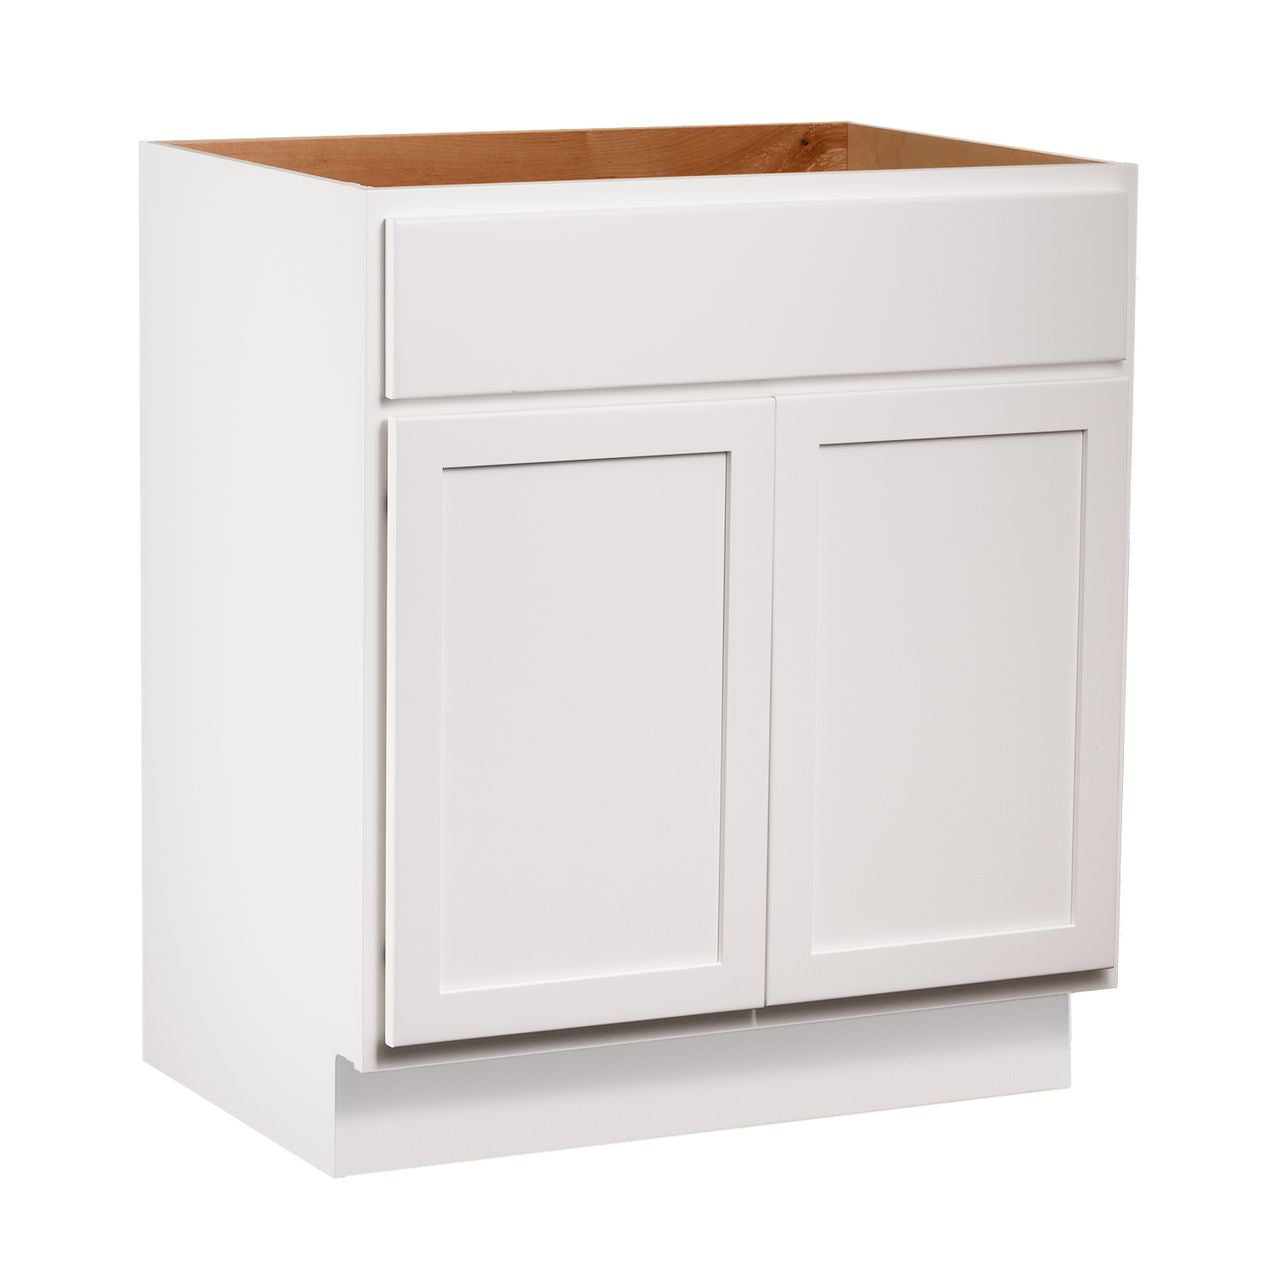 Quicklock RTA (Ready-to-Assemble) Pure White Vanity Base Cabinet- 30"W x 21"D